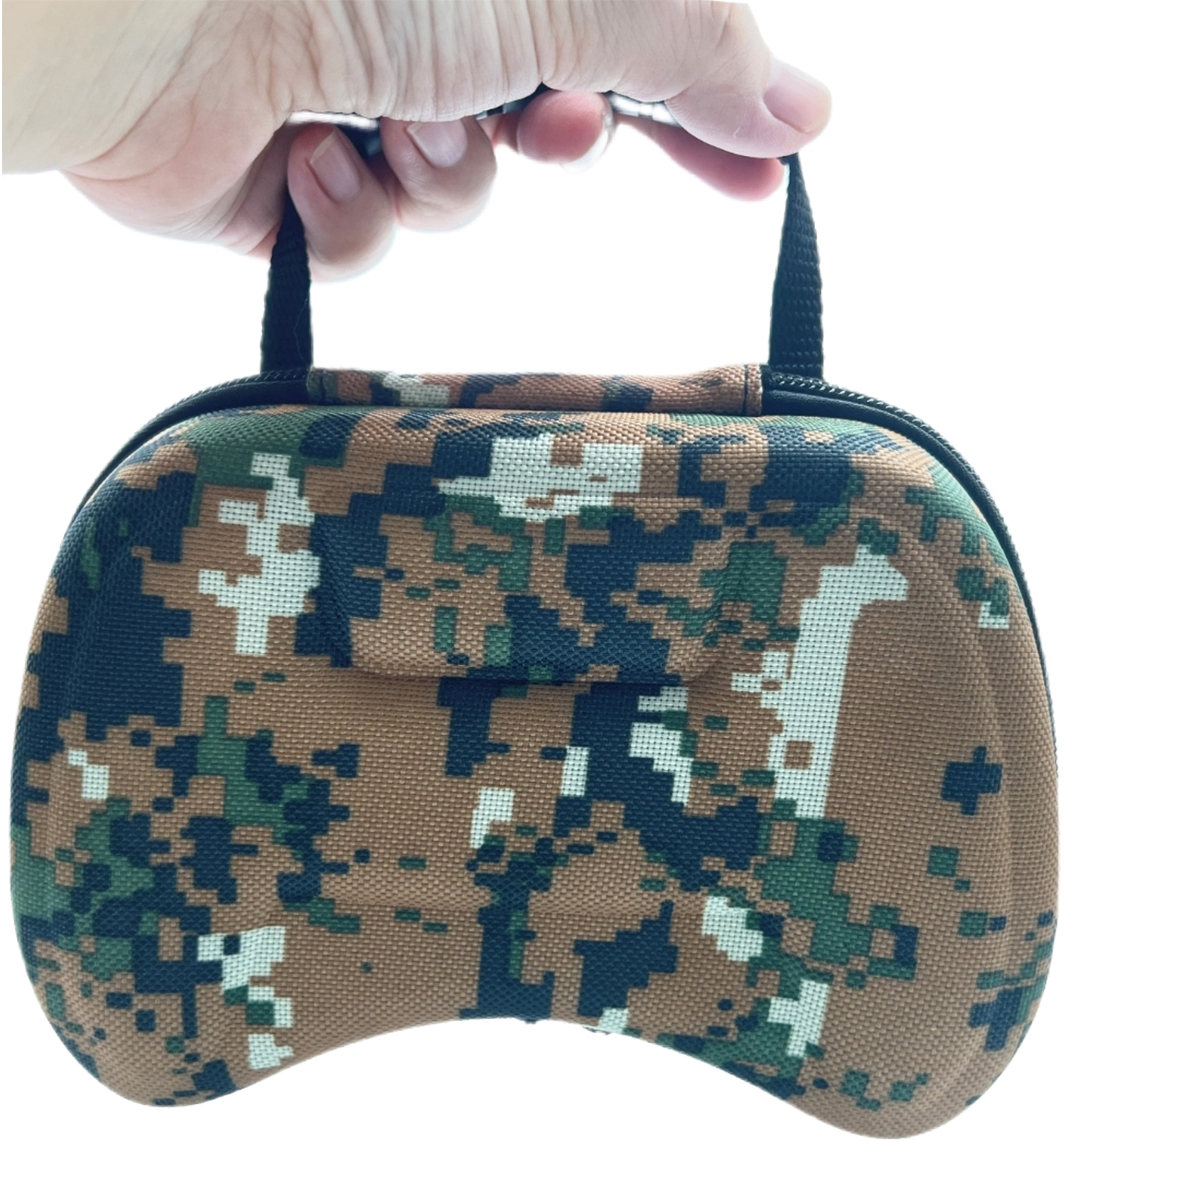 Colorful Manufacturer high quality EVA storage carrying case for Switch/Switch OLED Grip-con, Joypad, Joy-Cons